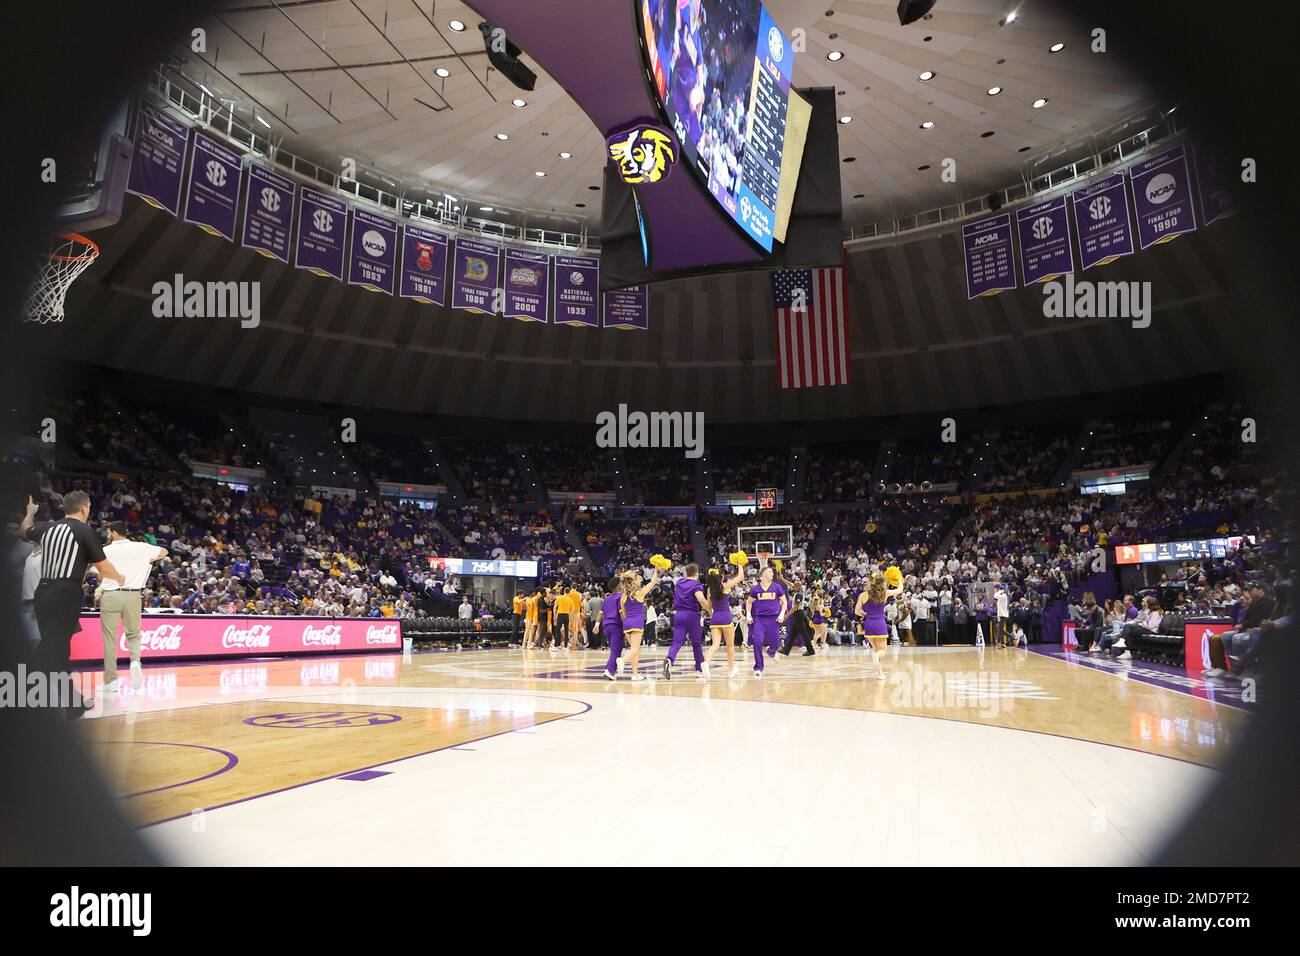 Baton Rouge, USA. 21st Jan, 2023. The LSU cheerleaders run off of the court after a timeout during a men's college basketball game at the Pete Maravich Assembly Center in Baton Rouge, Louisiana on Saturday, January 21, 2022. (Photo by Peter G. Forest/Sipa USA) Credit: Sipa USA/Alamy Live News Stock Photo